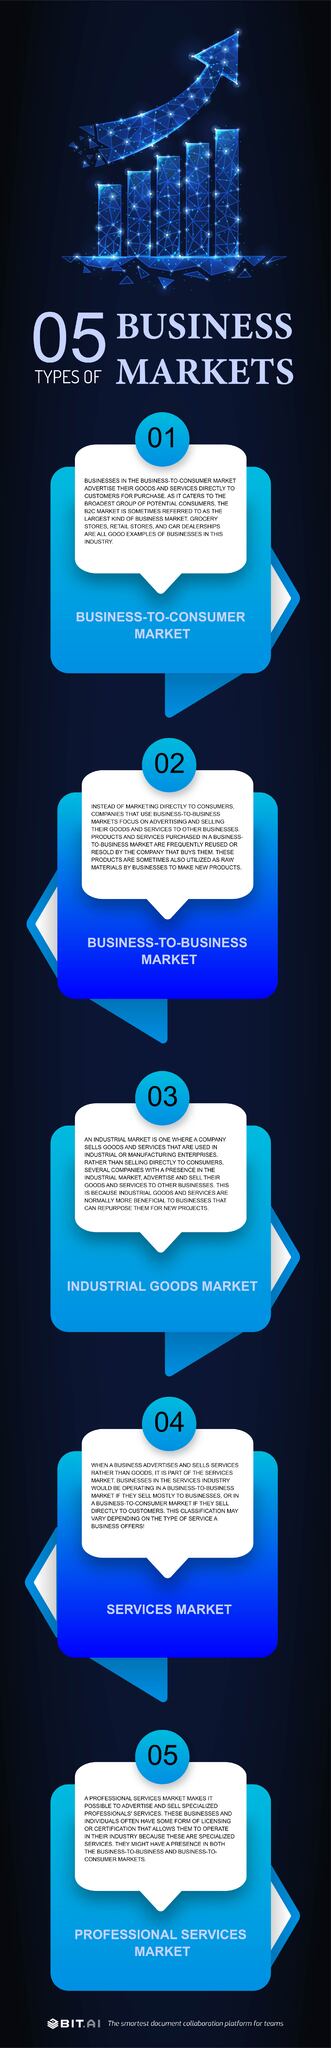 Business markets infographic